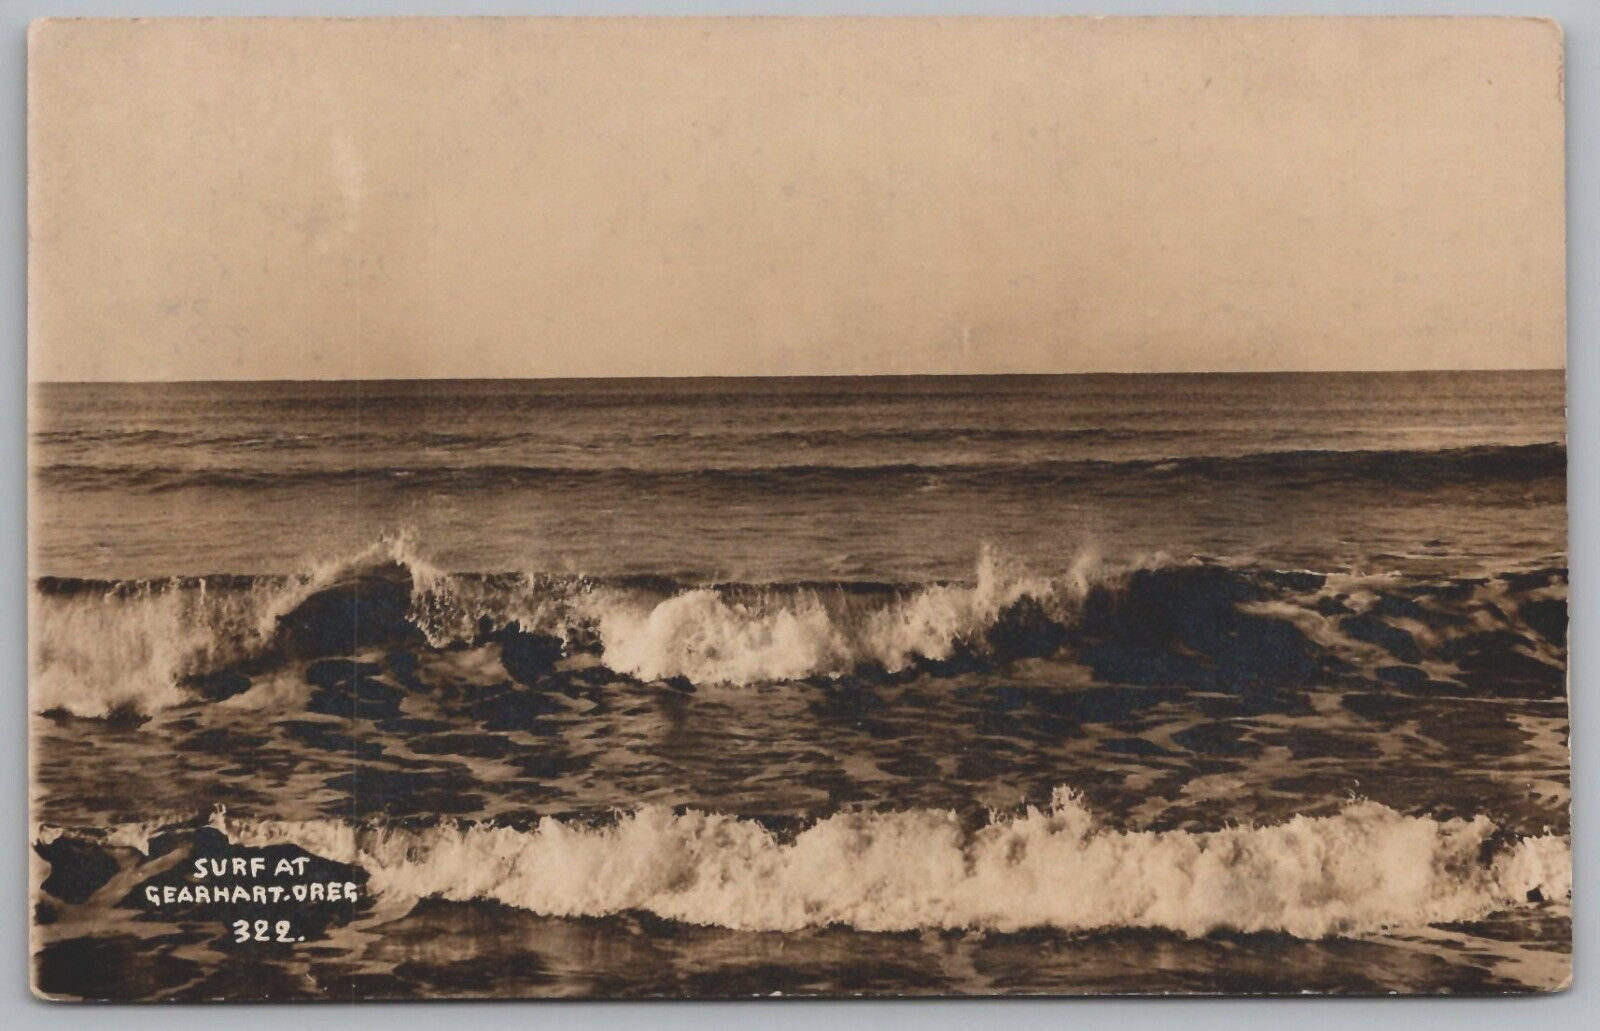 Antique Postcard - Surf at Gearhart Oregon - OR